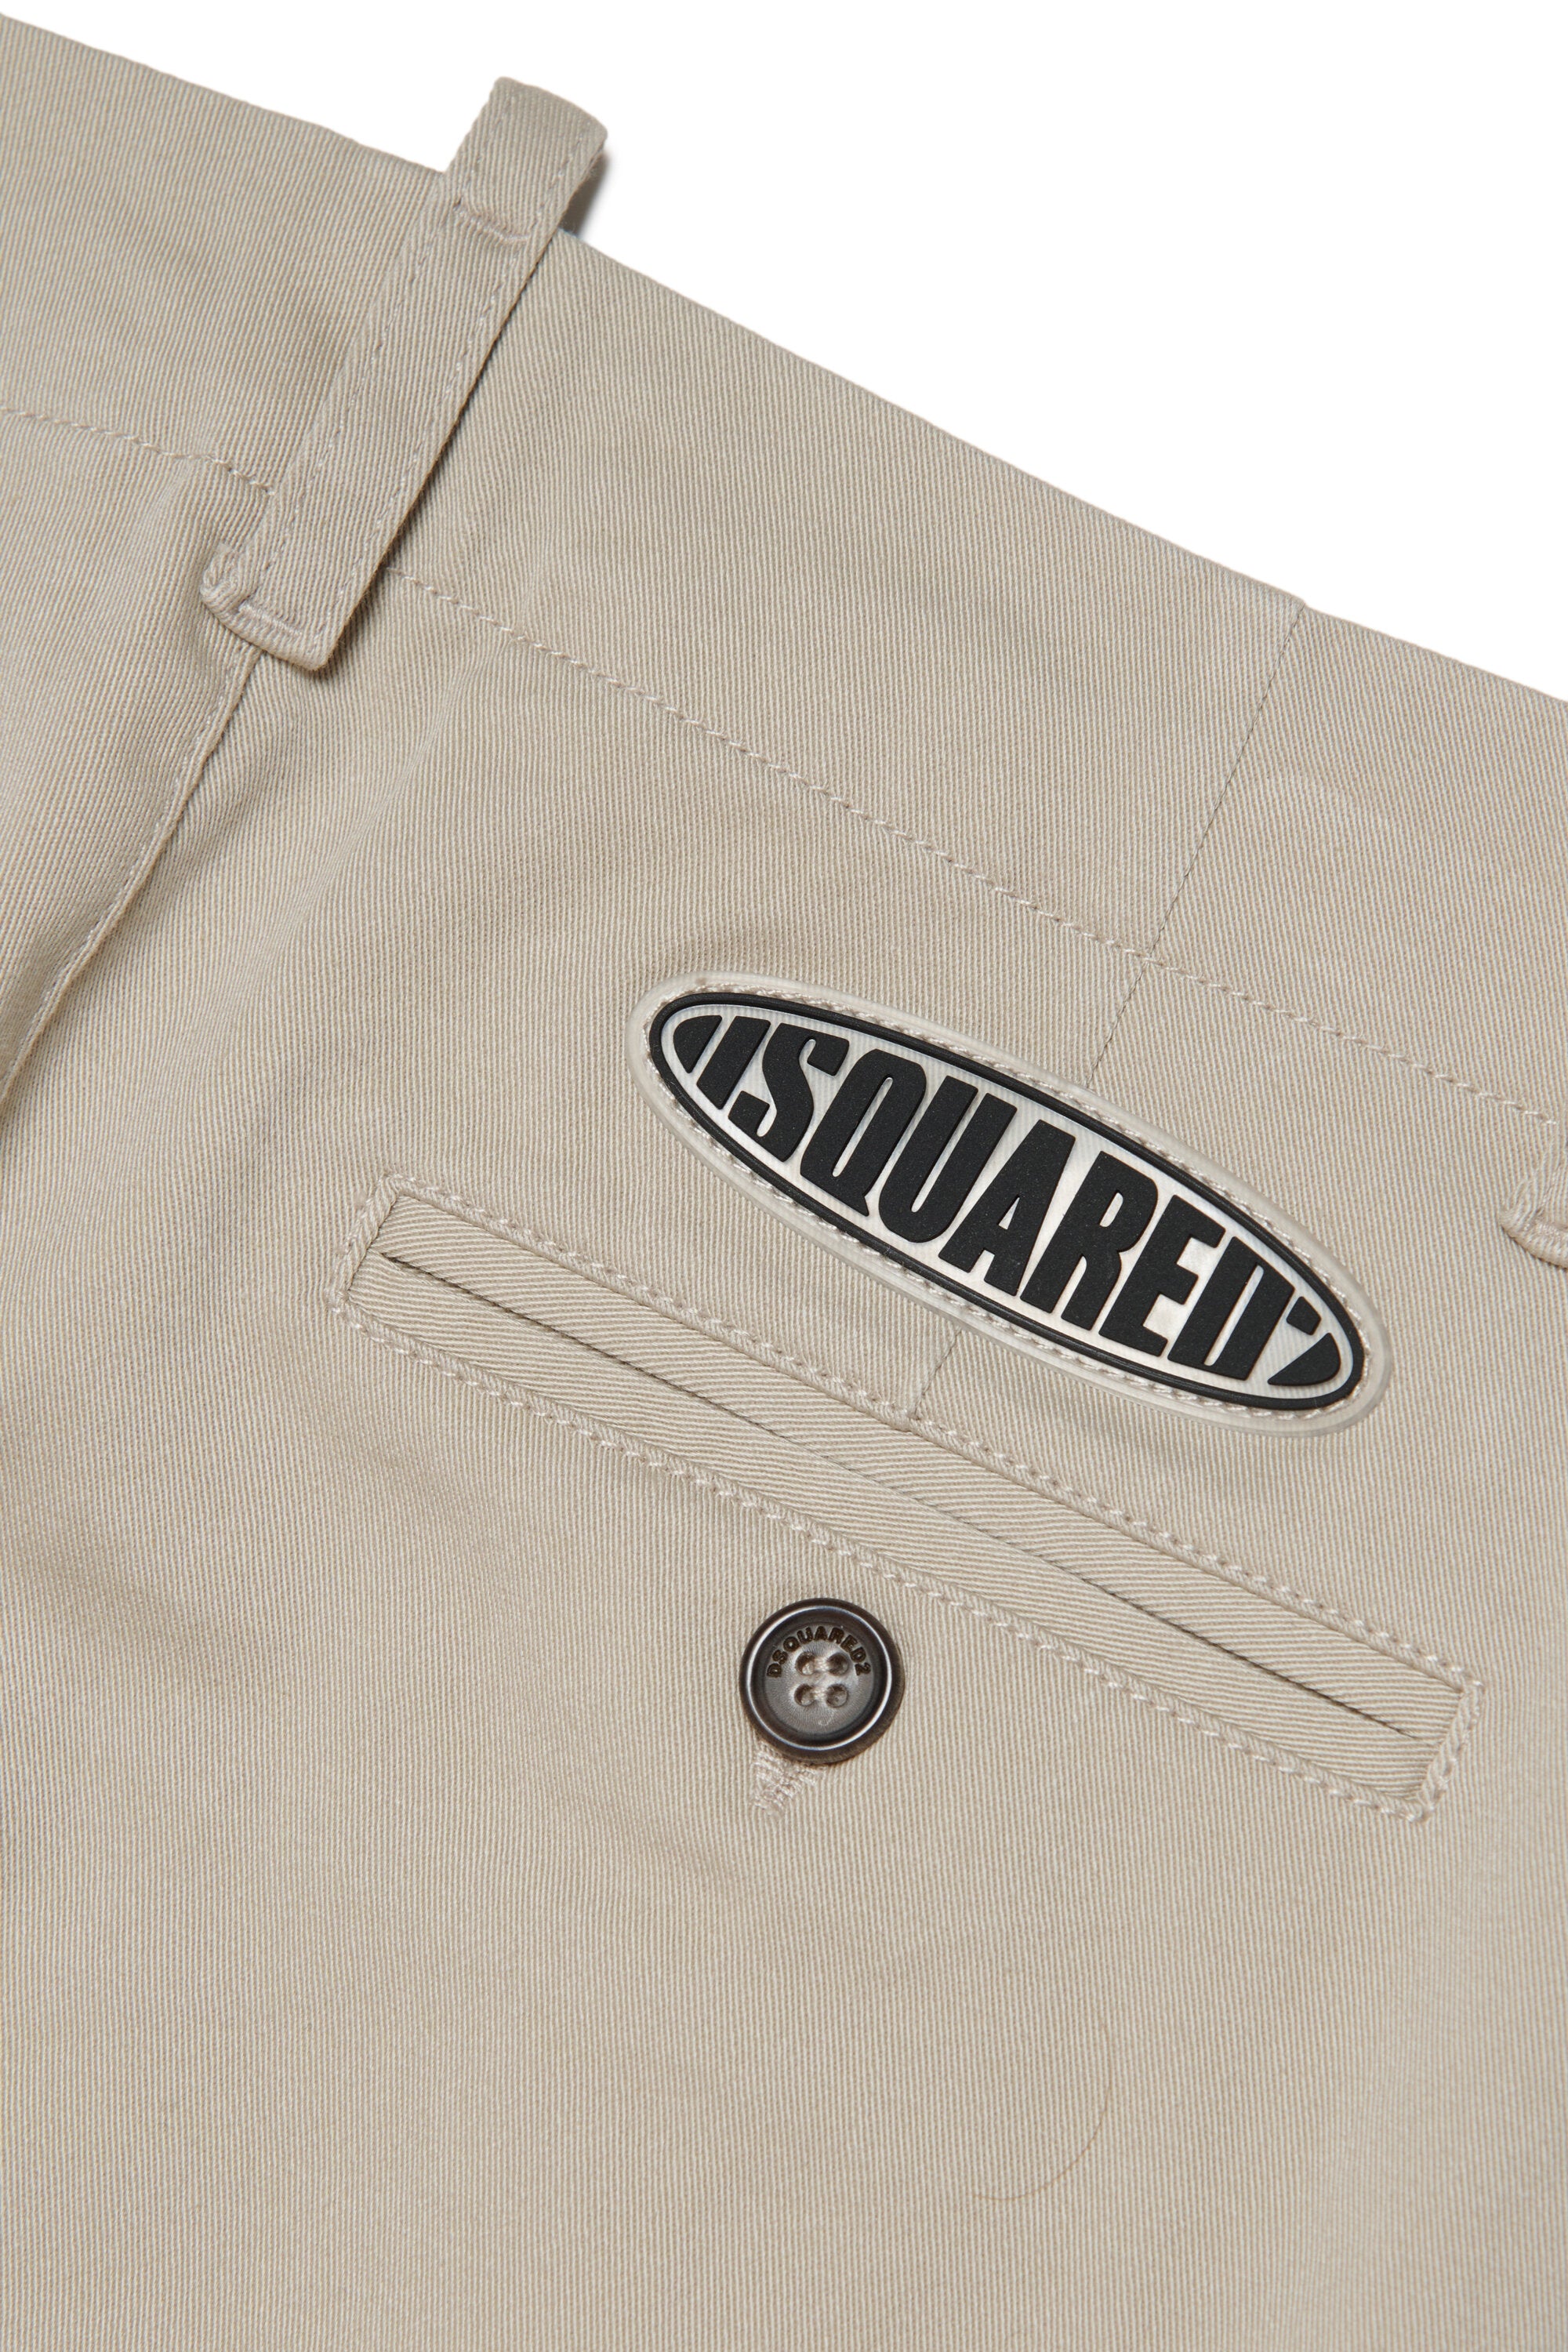 Gabardine chino pants branded with surf logo patch